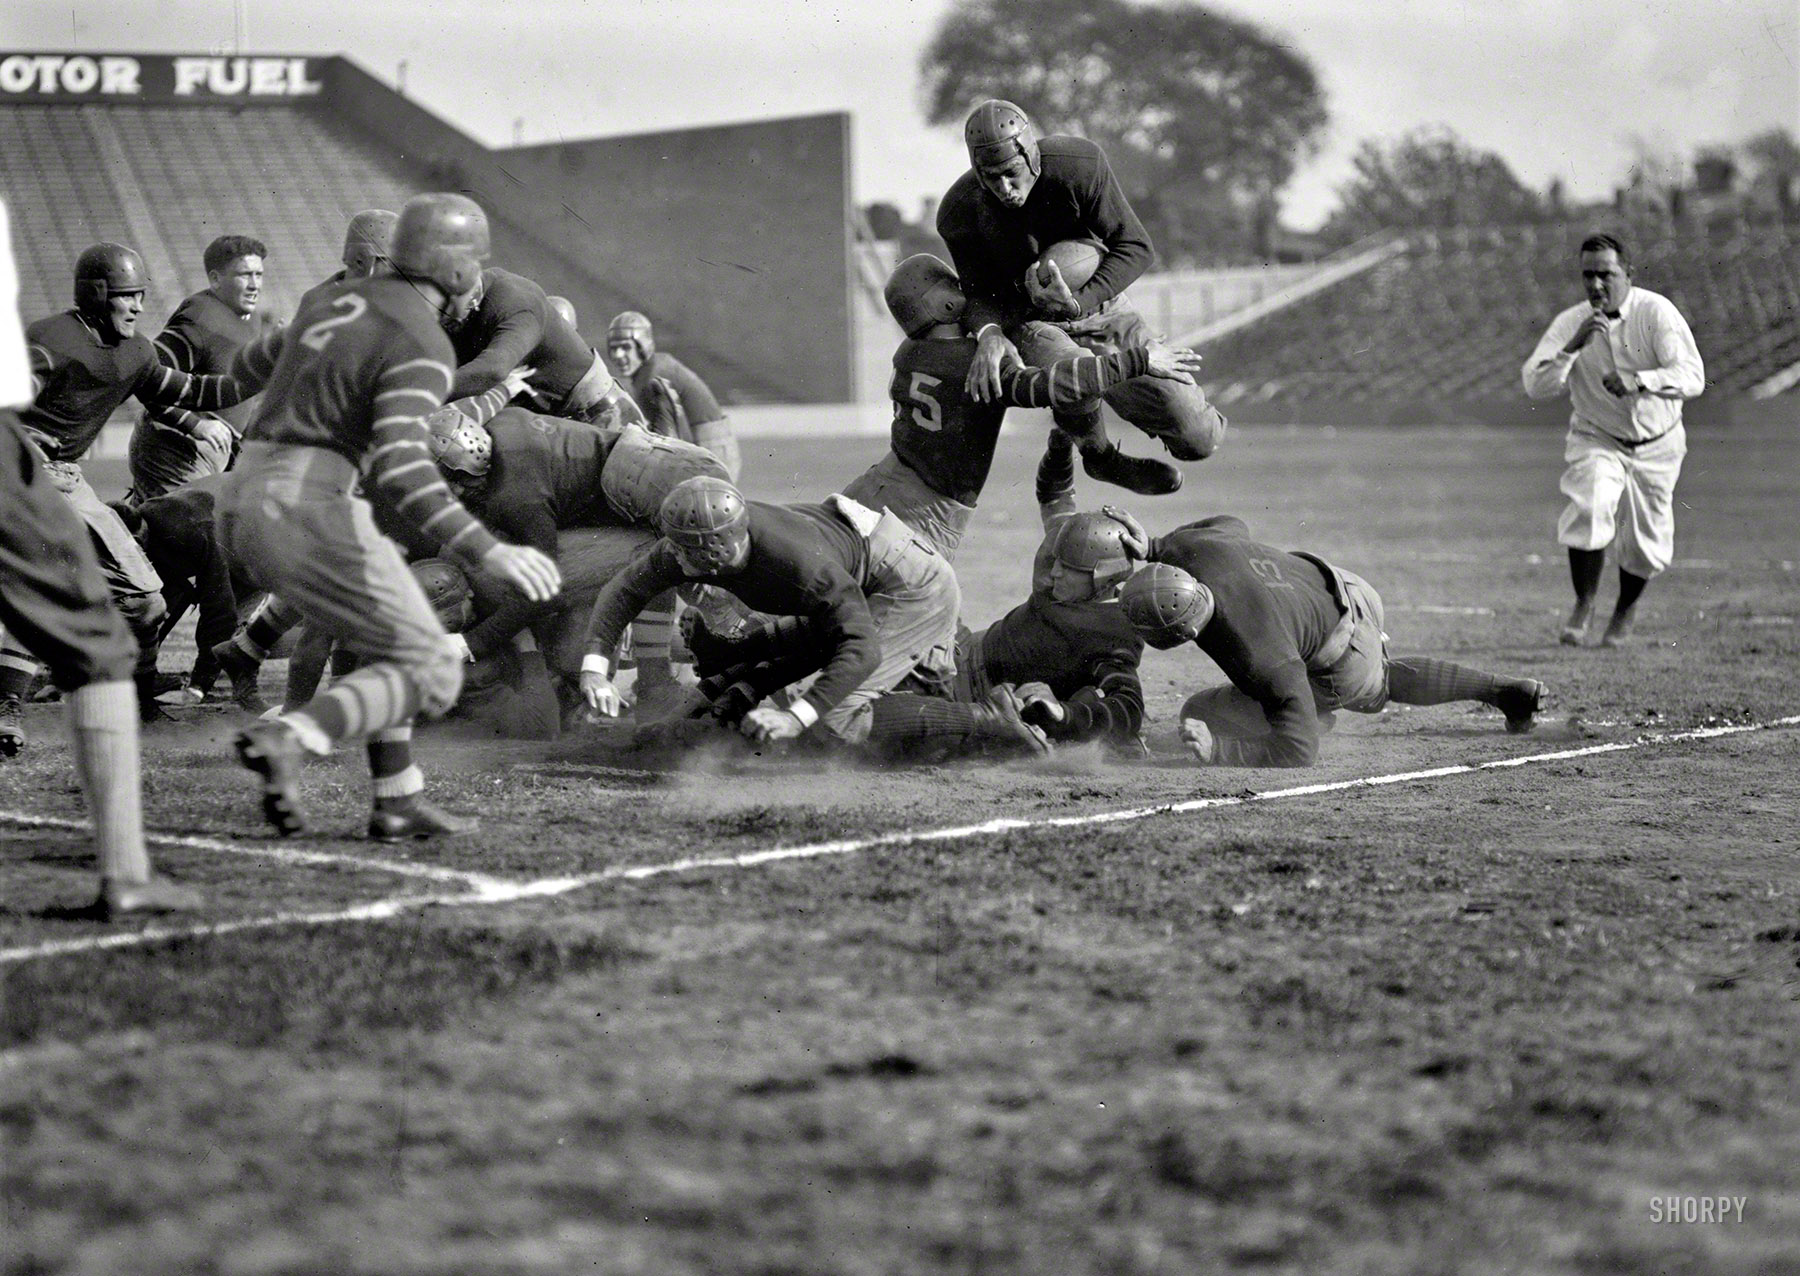 October 25, 1924. Washington, D.C. "Earl Goodwin, Georgetown-Bucknell." The Bisons spanked the Hilltoppers 14-6. National Photo Co. View full size.